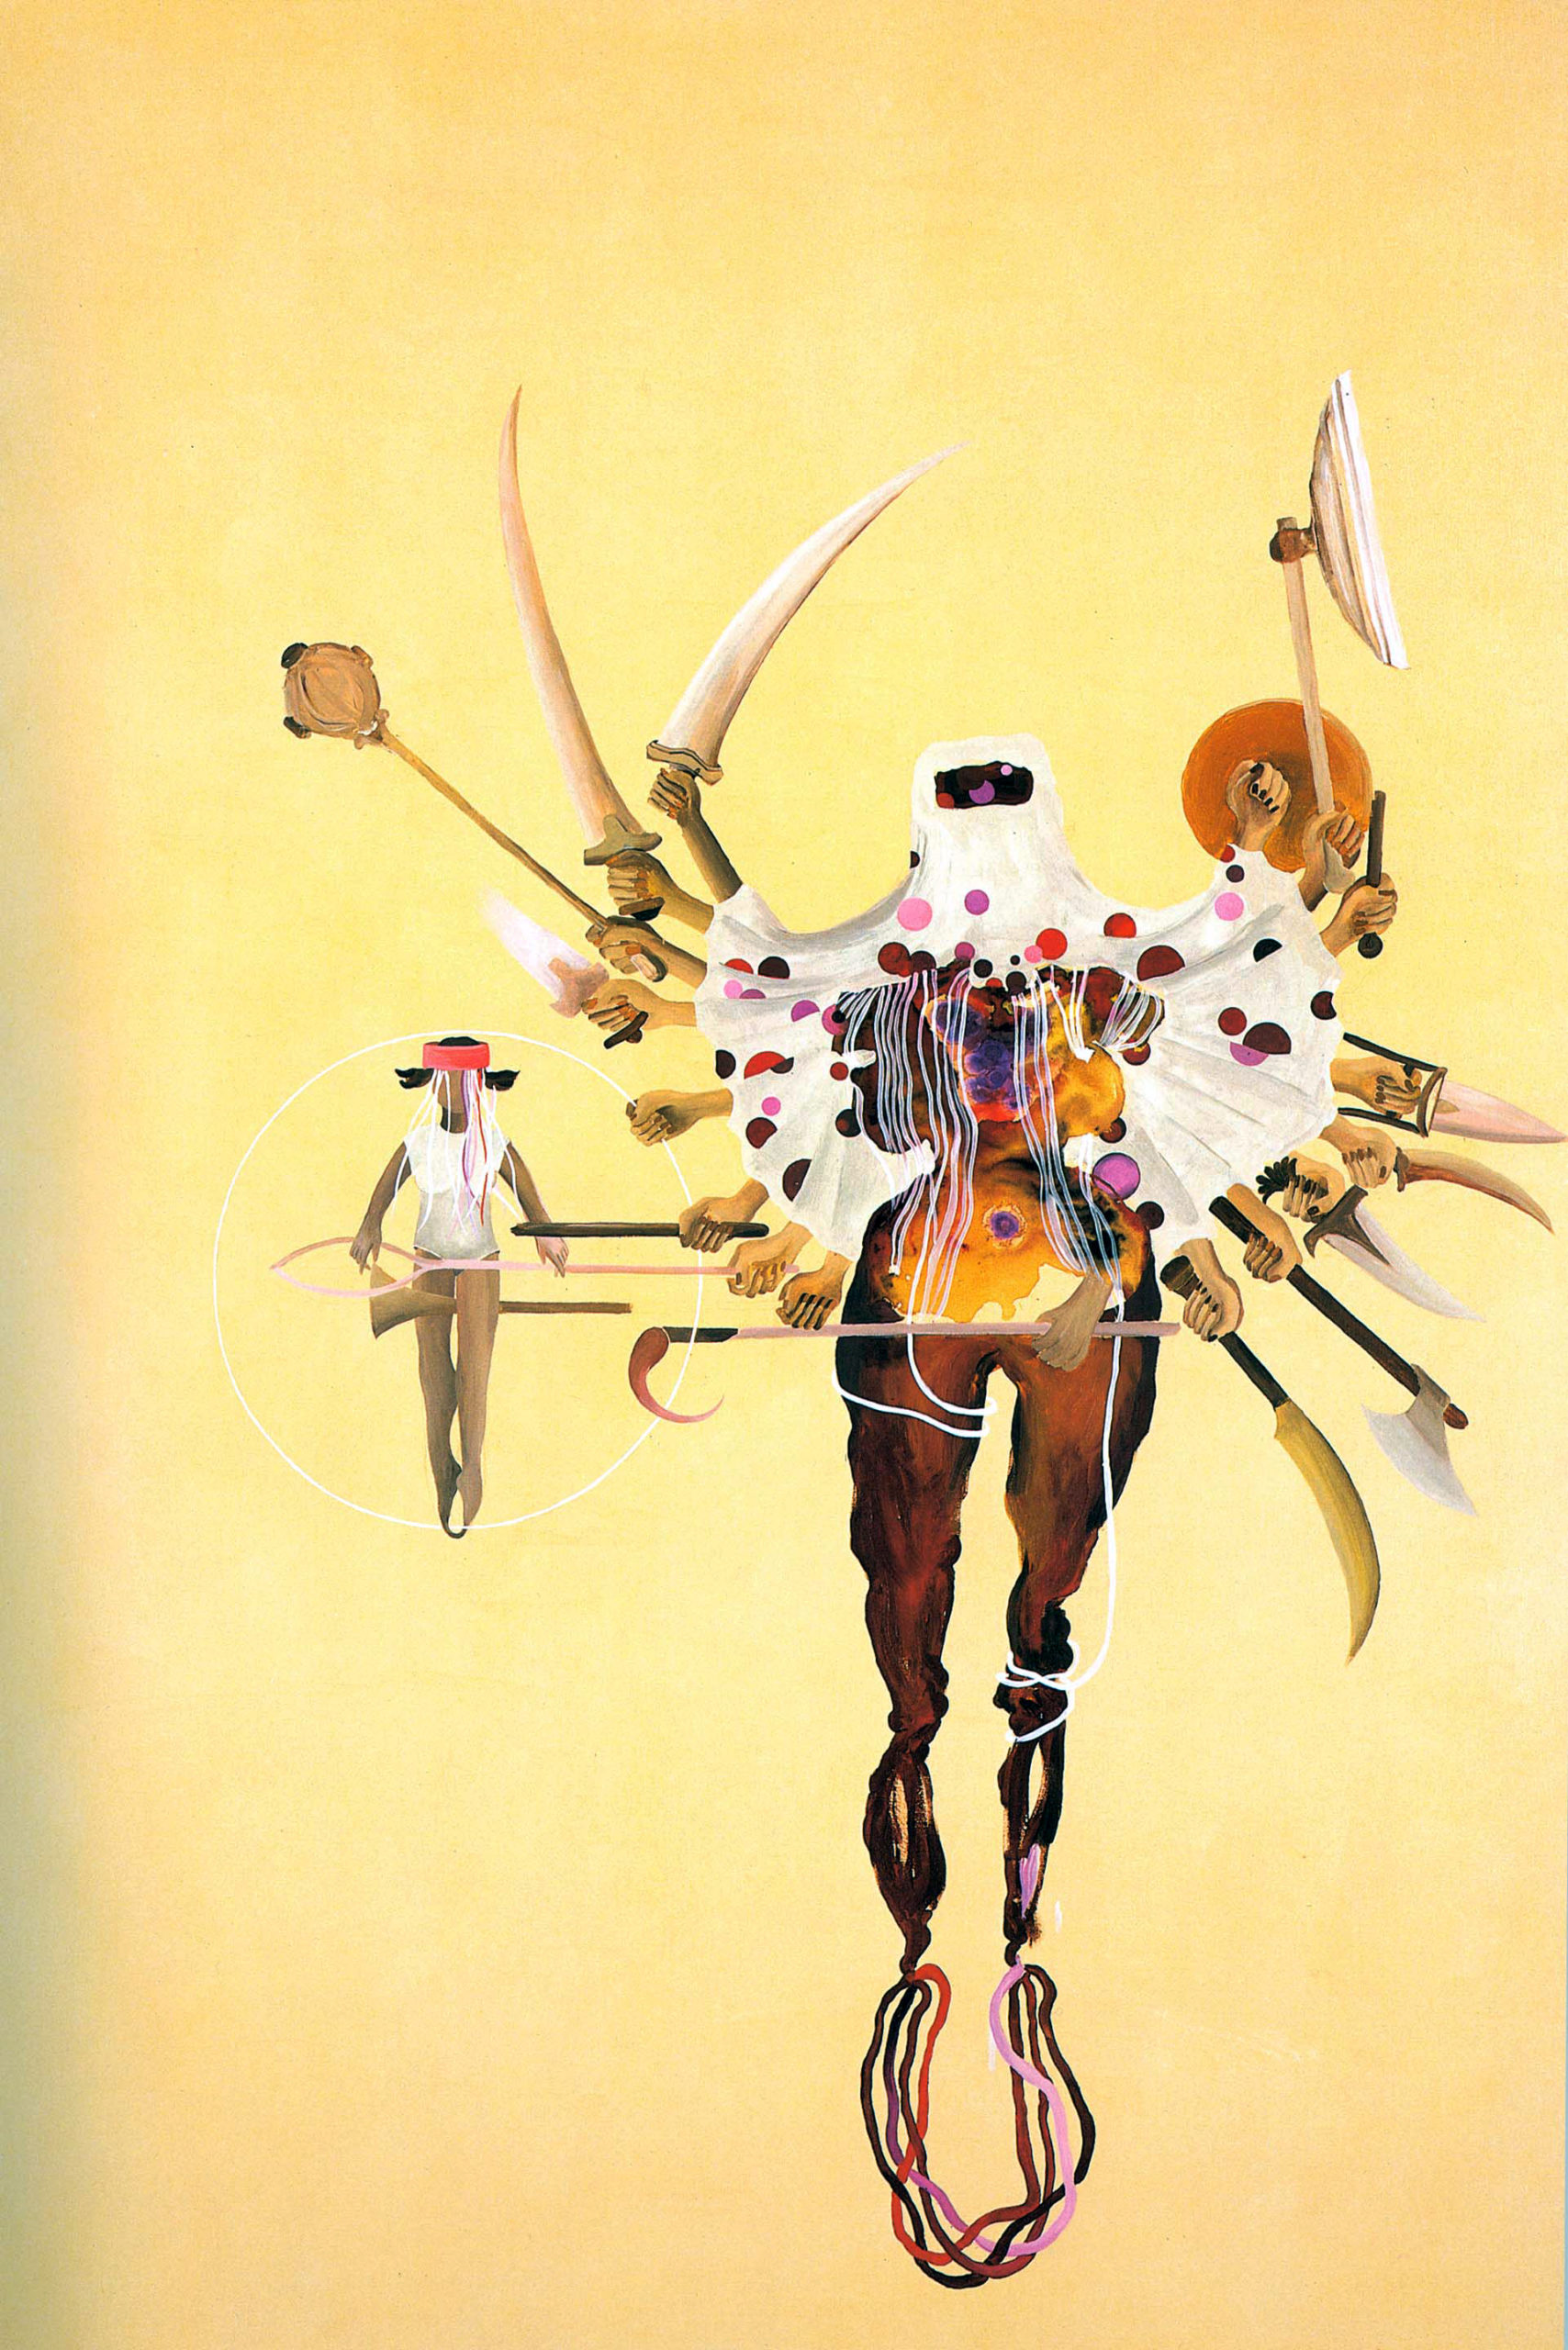 Shahzia Sikander, Fleshy Weapons, 1997, acrylic, dry pigment, watercolor and tea wash on linen, 243.8 x 167.6 cm